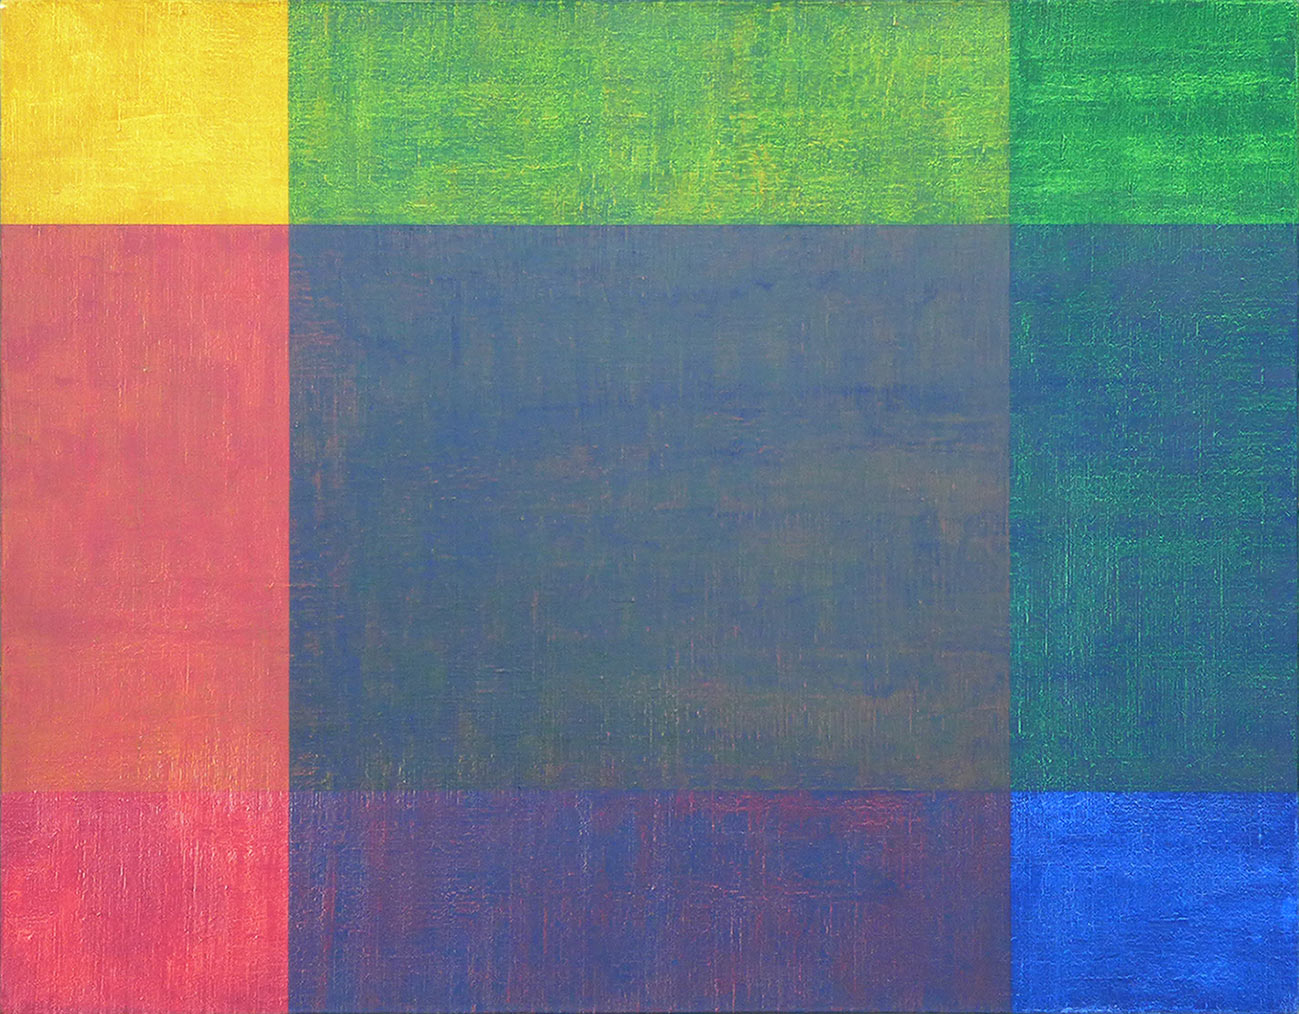 4 gold rectangles of 4 colors, blue, green, yellow and red, are partially superimposed in a dextrogyral rotational movement with transparent colors for finer optical mixtures on a canvas of one square meter.